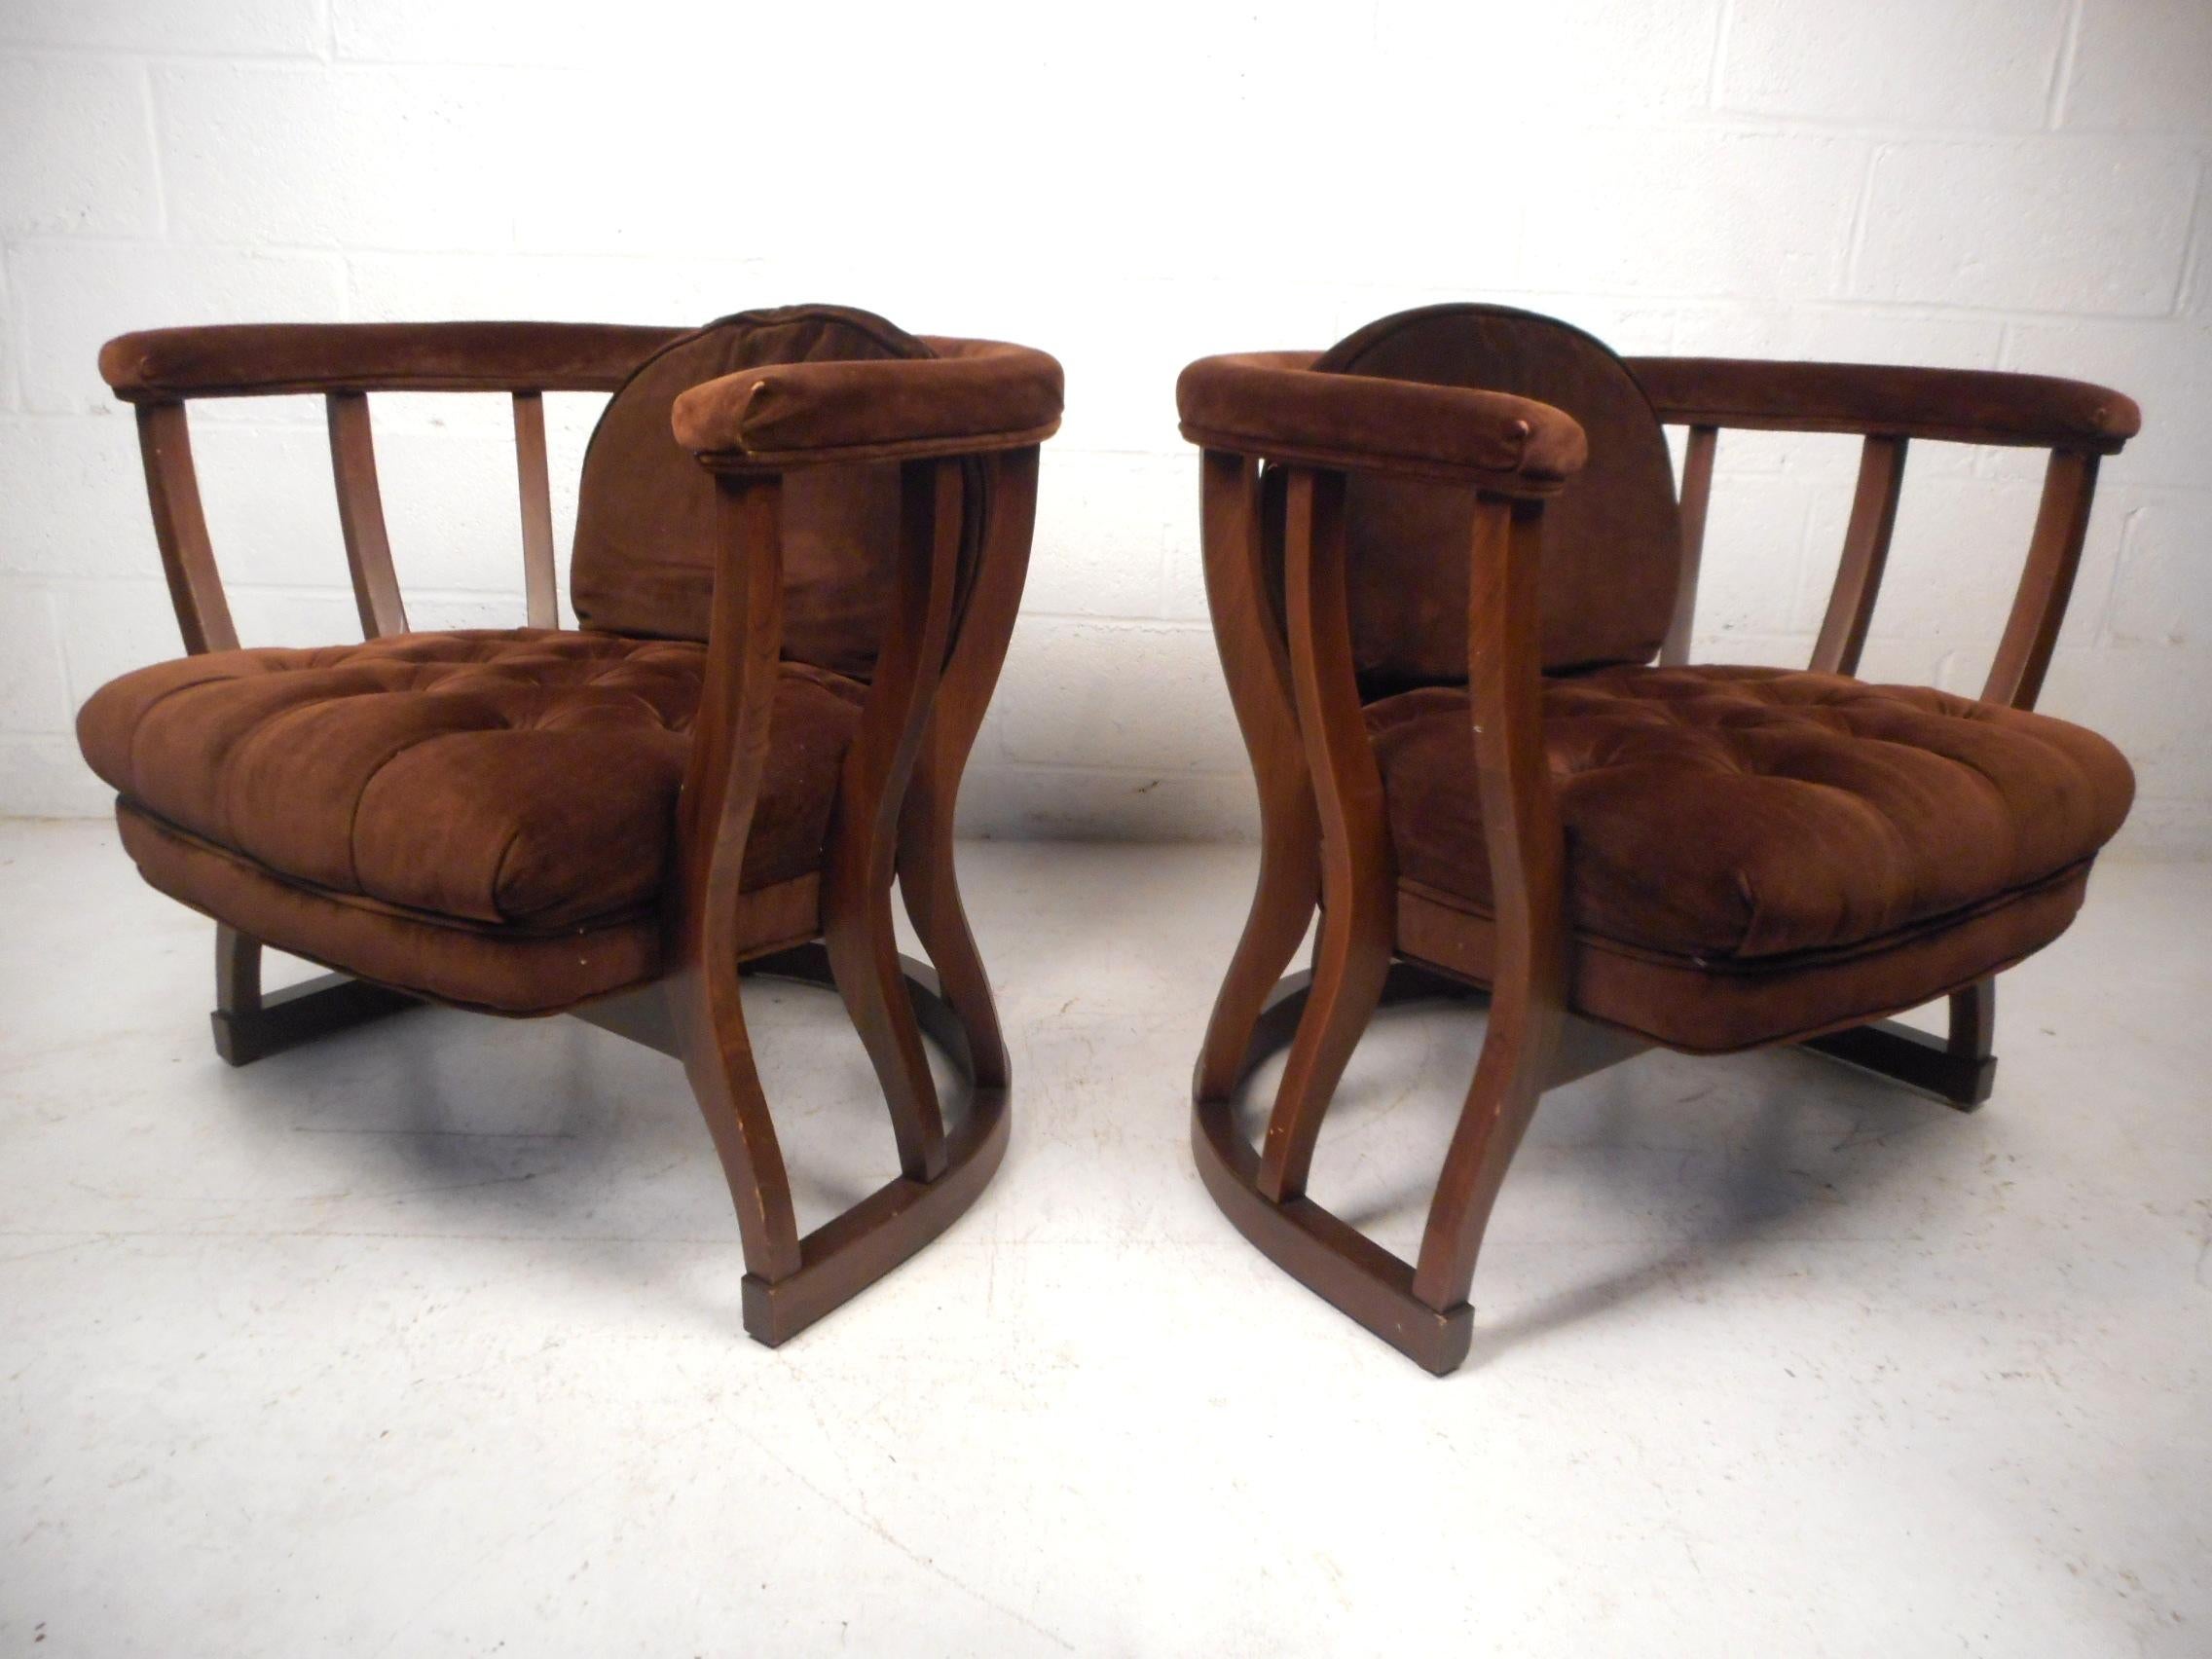 Upholstery Pair of Mid-Century Modern Upholstered Barrel Back Chairs